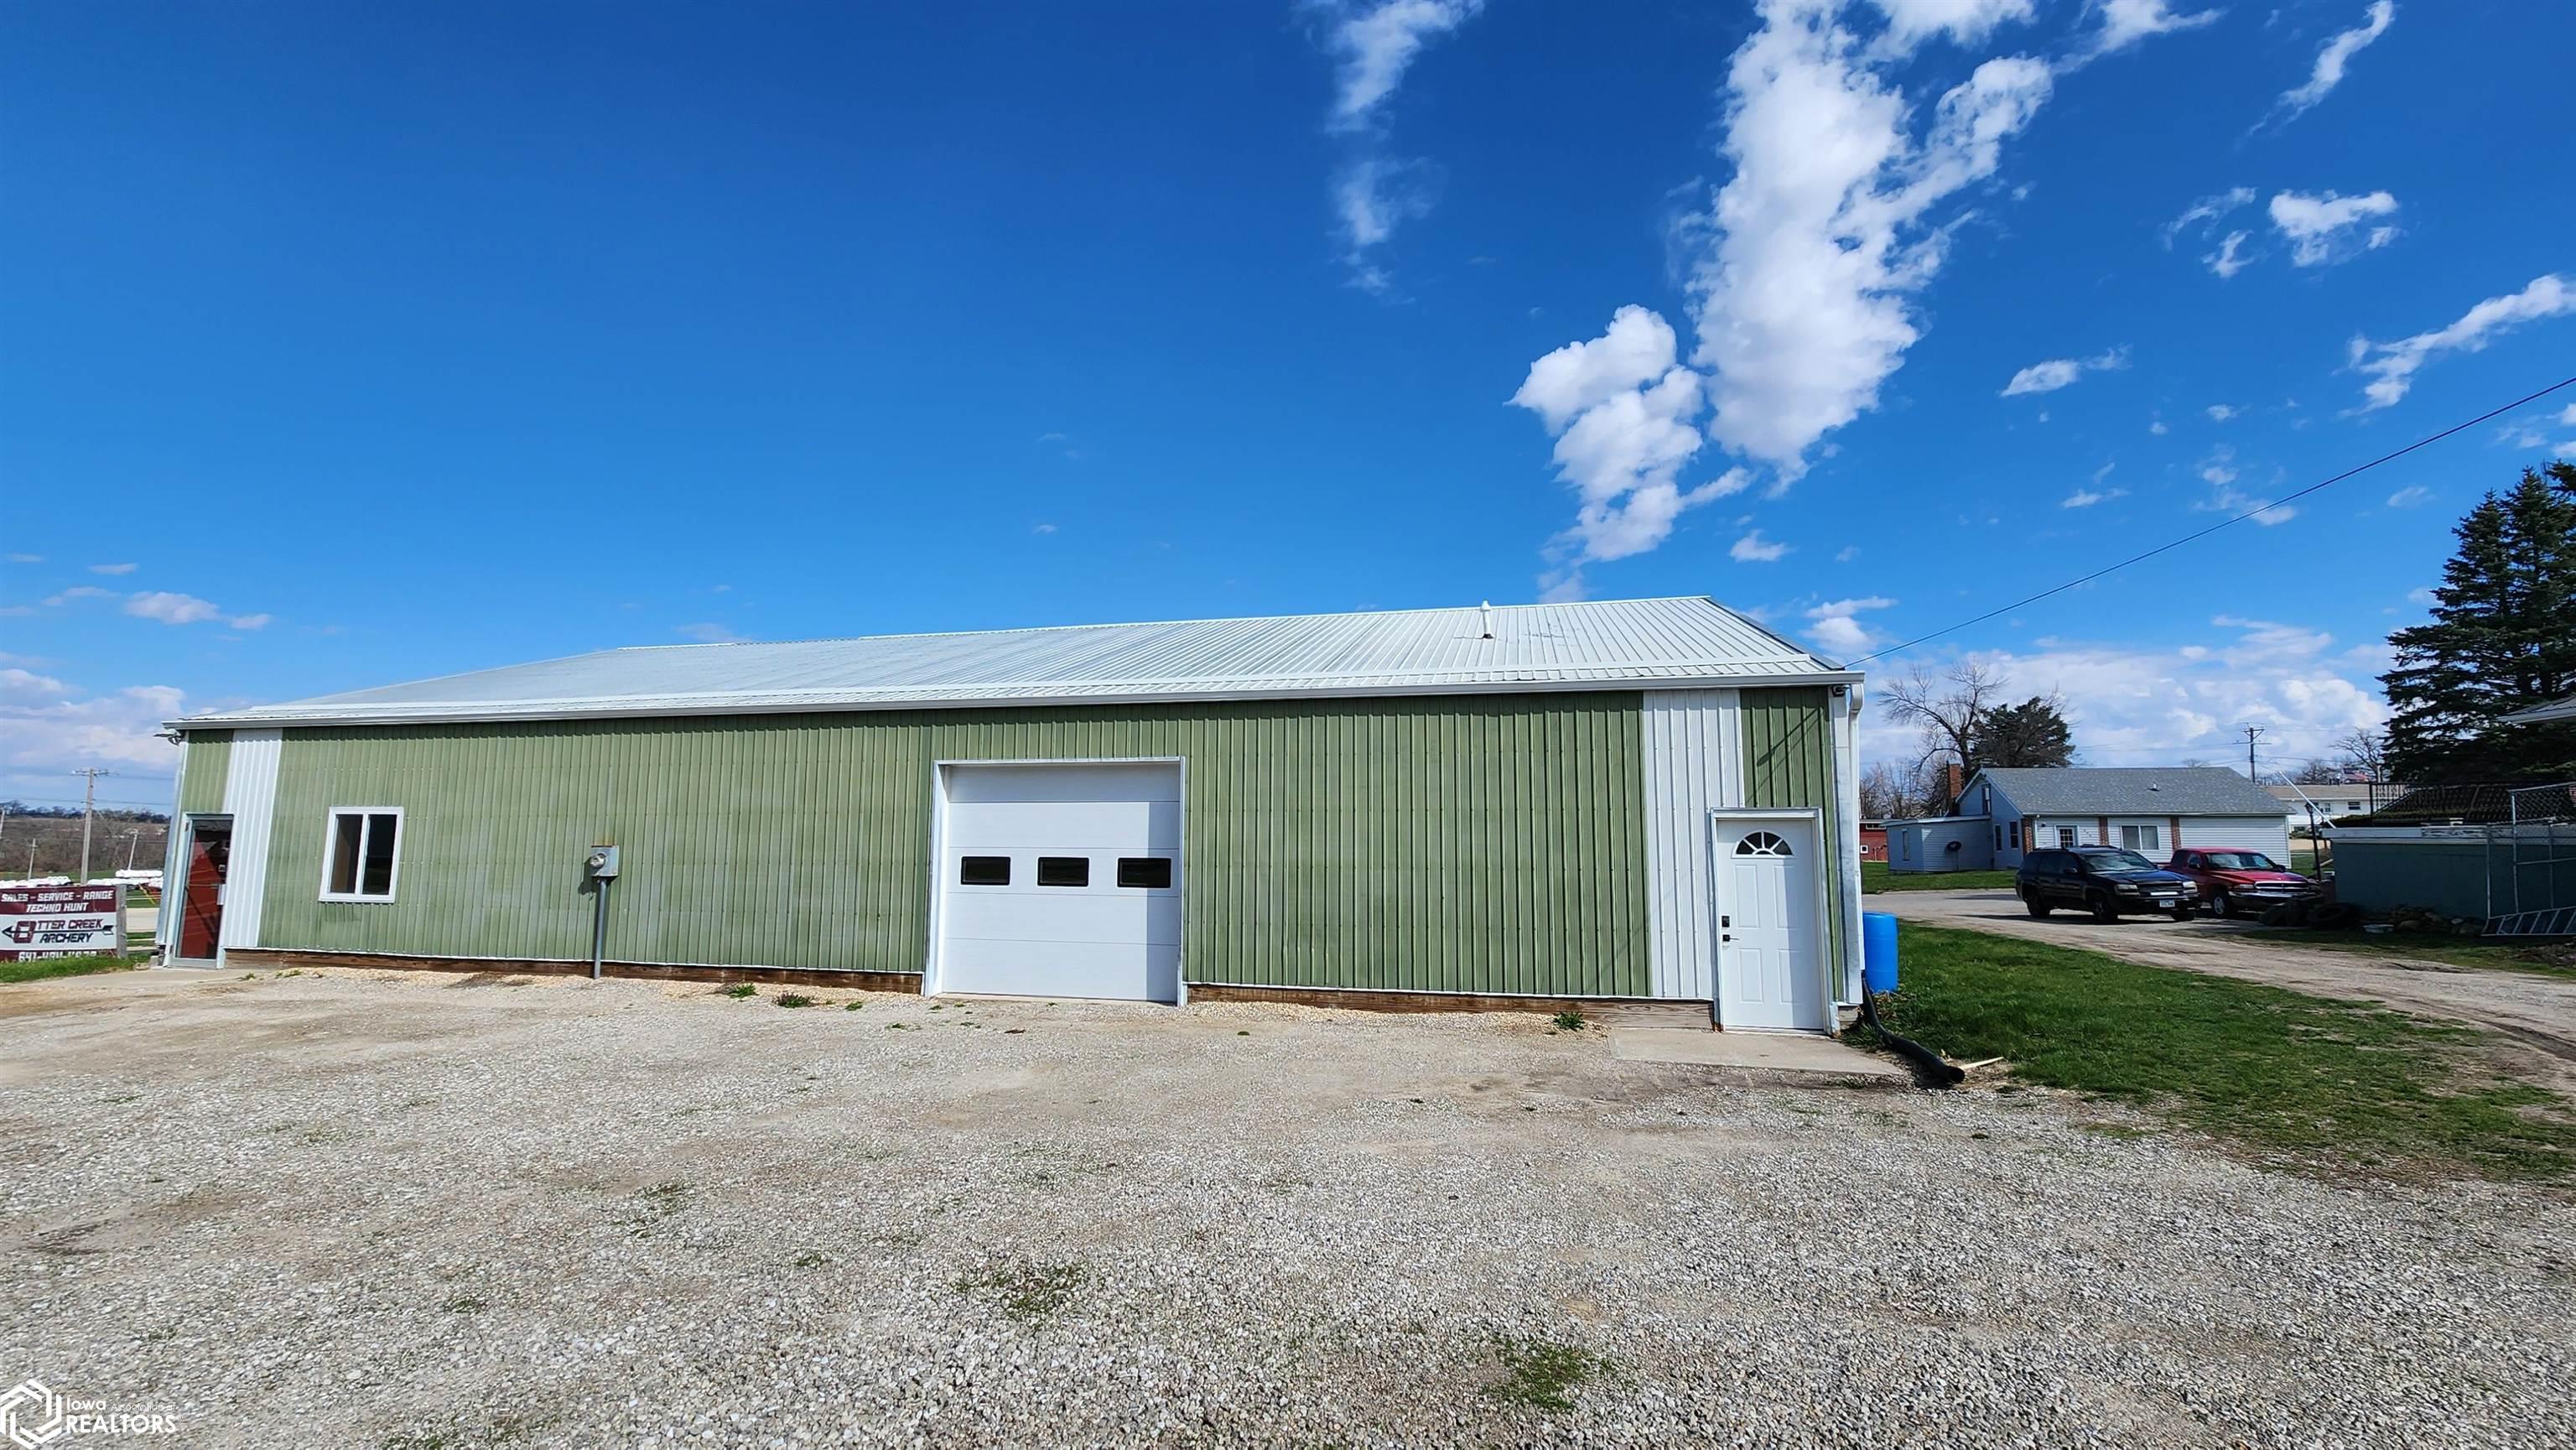 201 County, Toledo, Iowa 52342, ,Commercial (5+ Units),For Sale,County,6316368